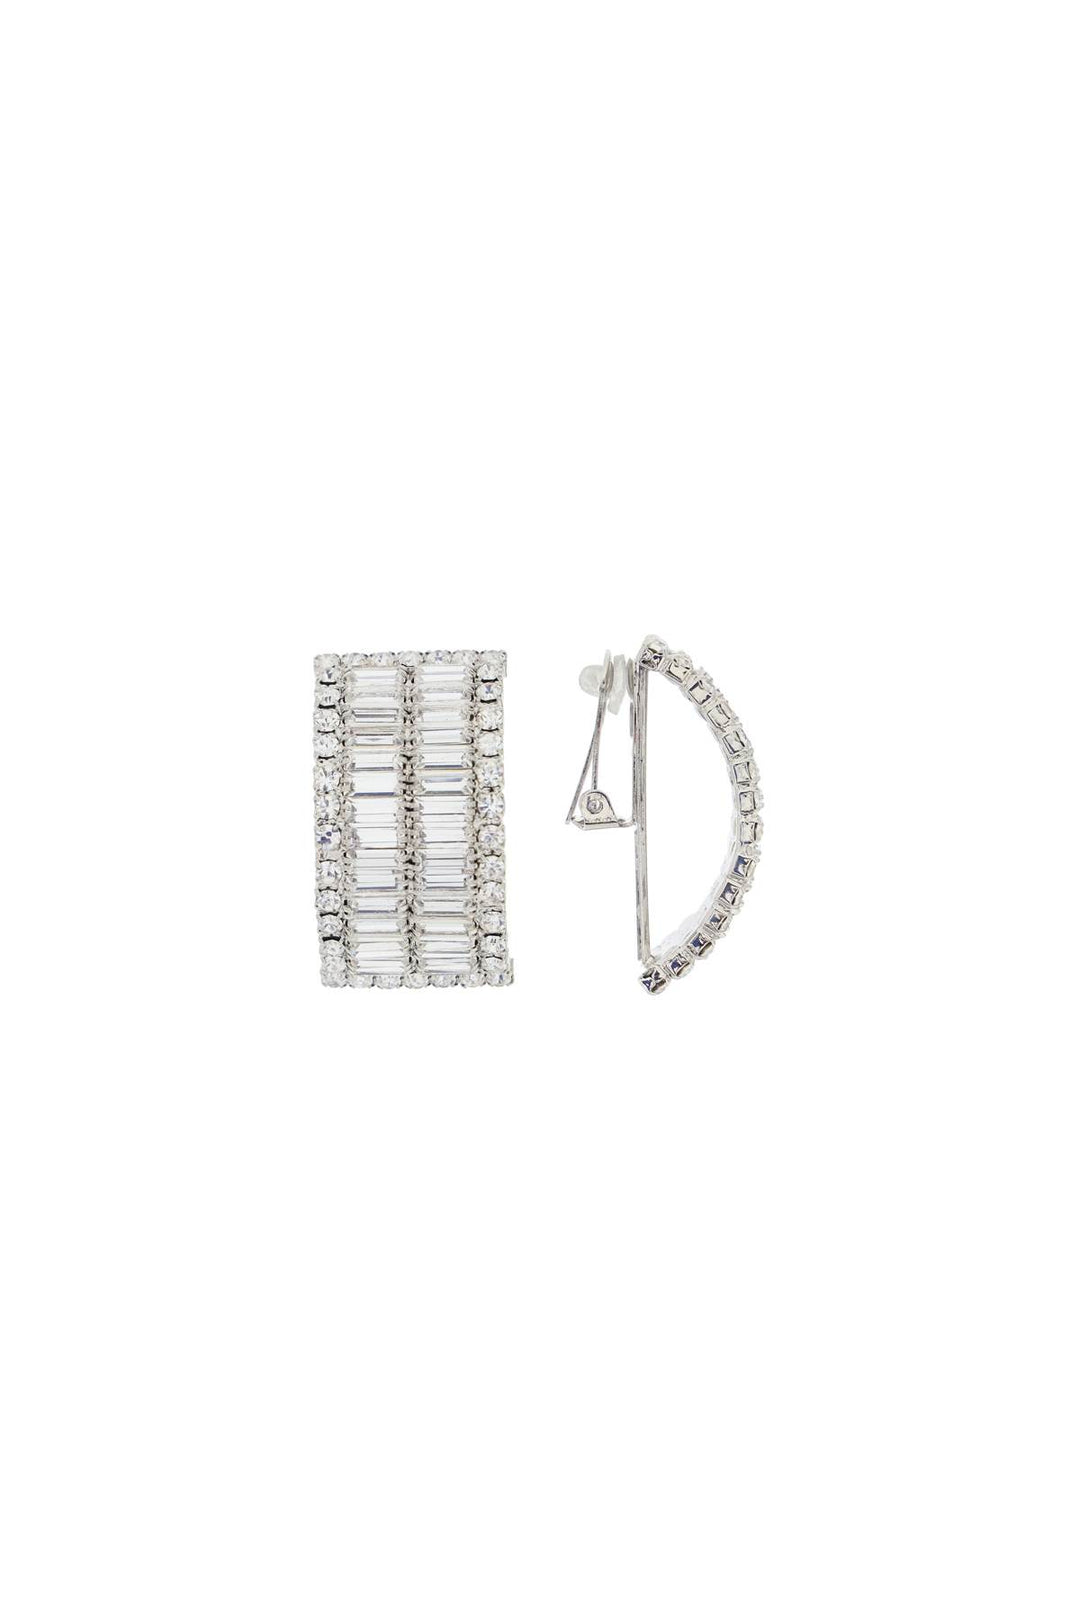 Alessandra Rich Clip On Earrings With Crystals   Argento